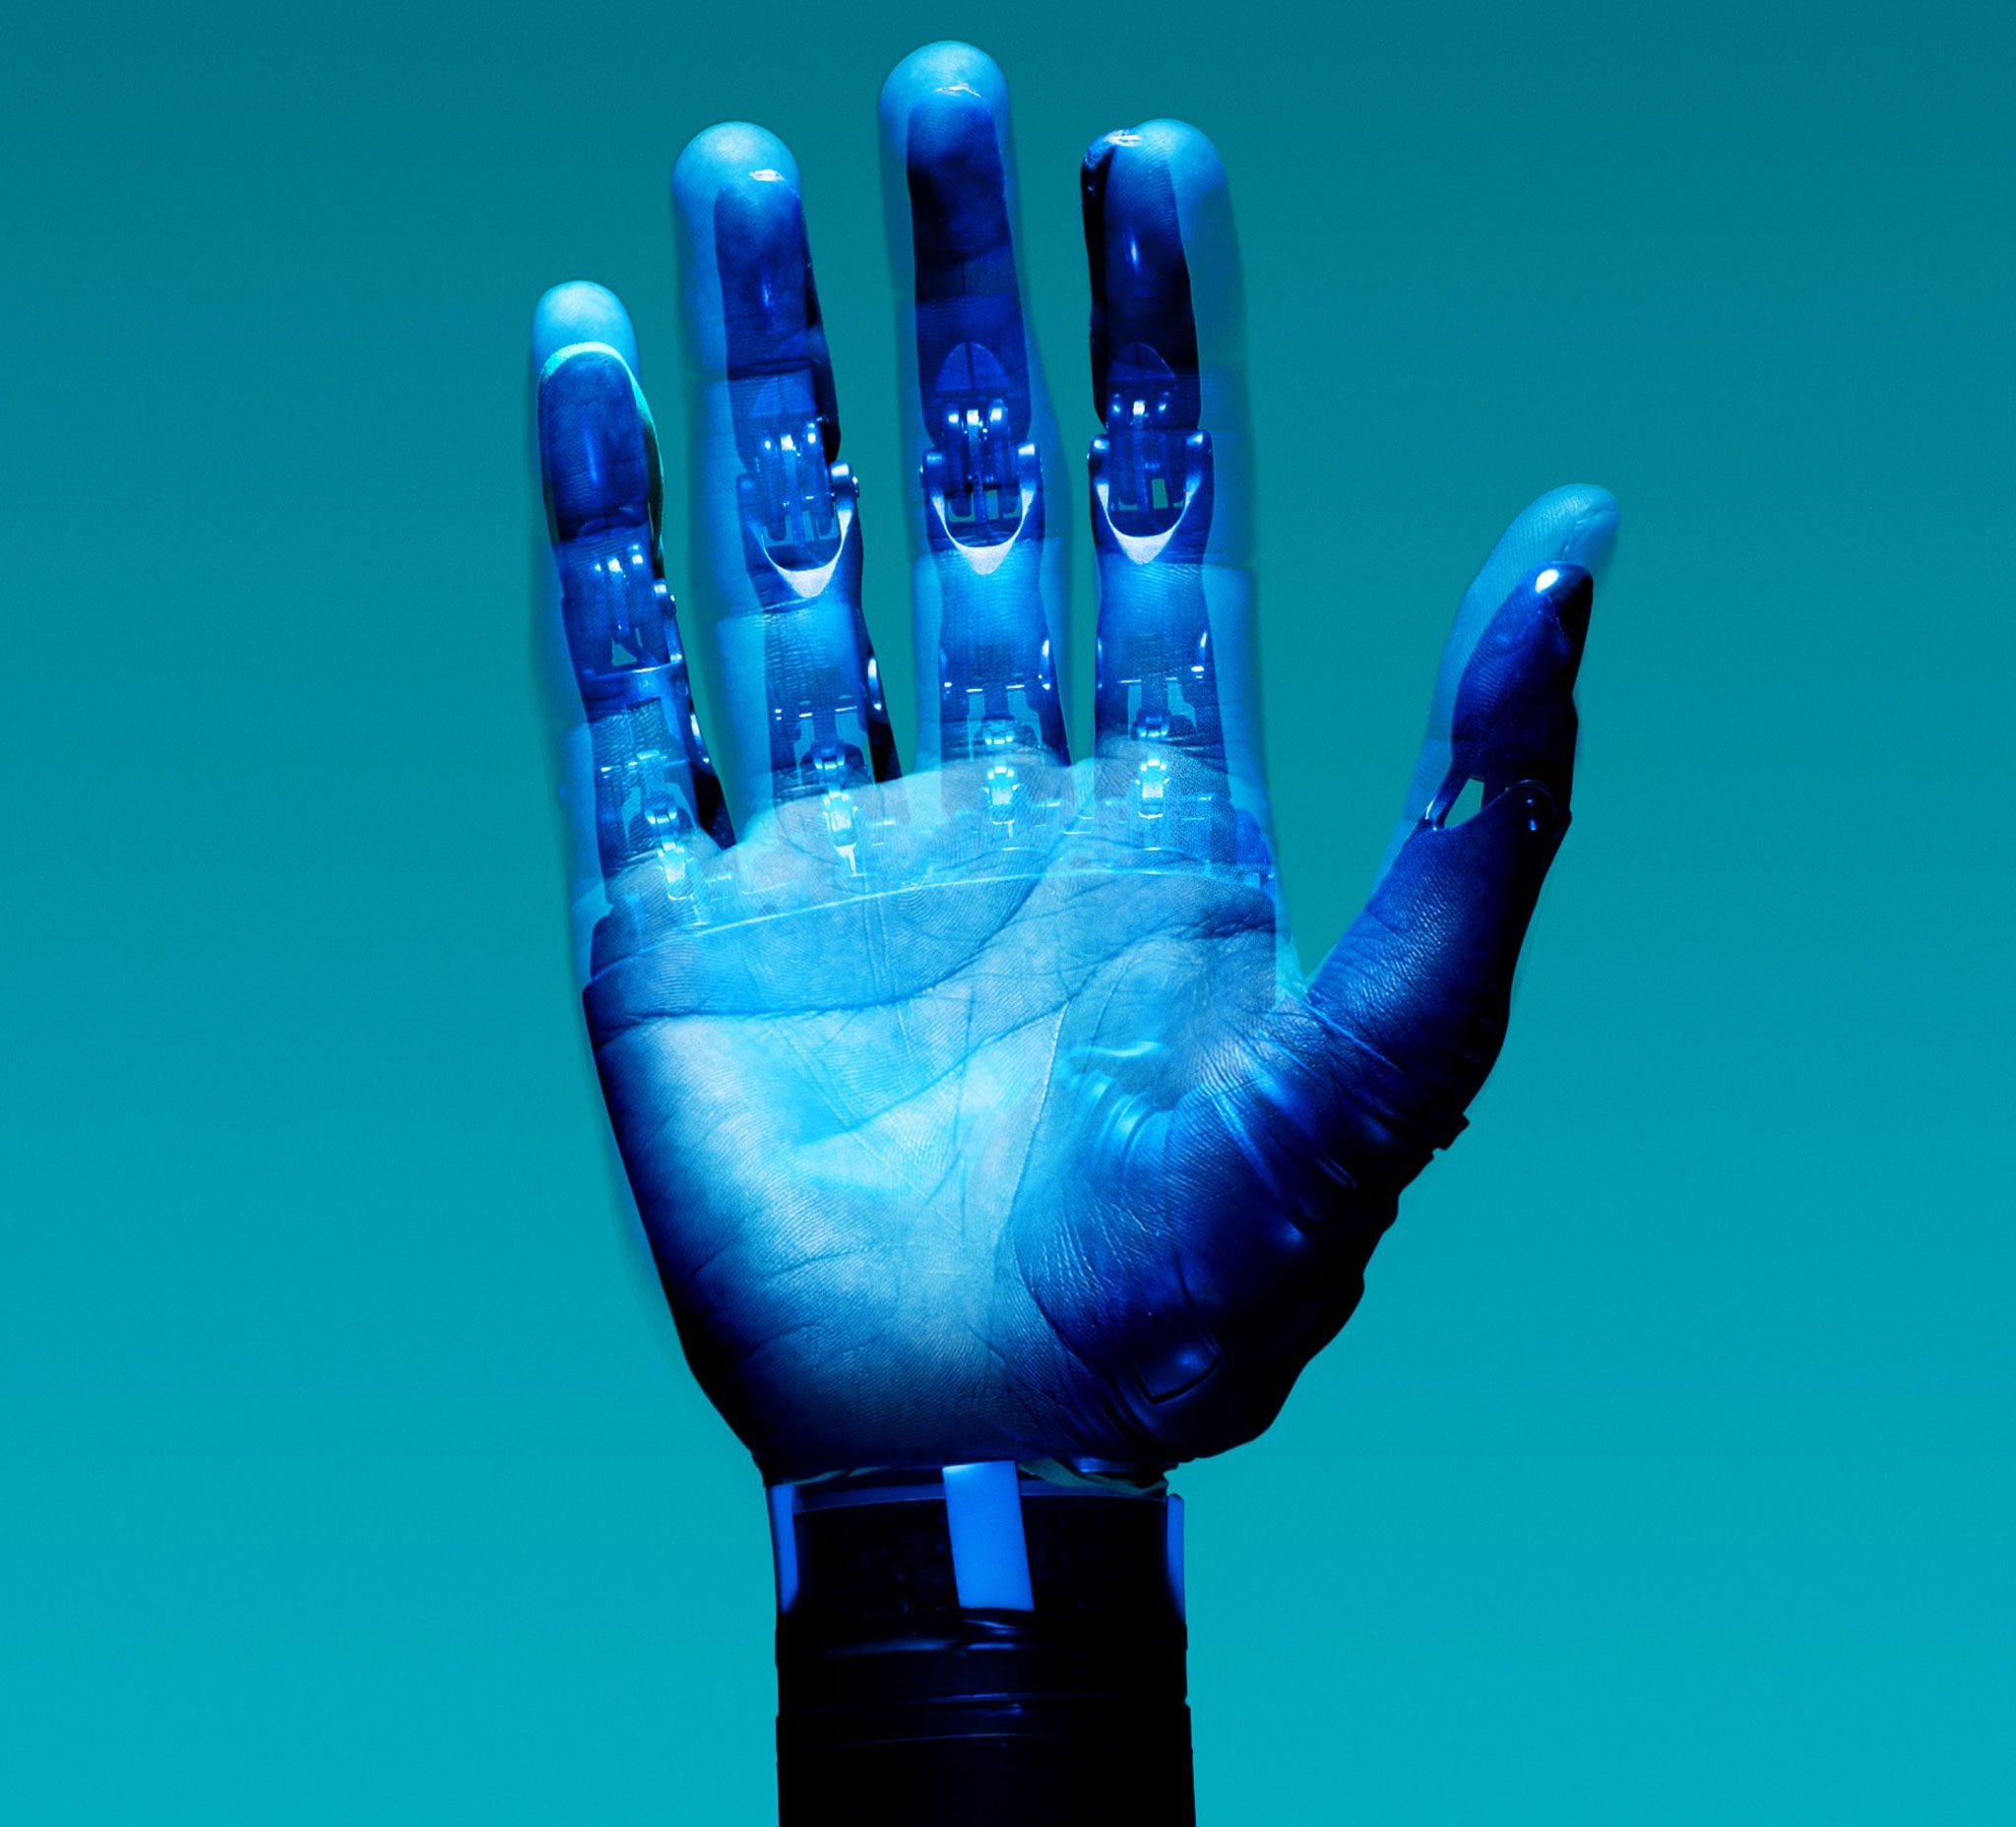 An image of a robotic hand superimposed on a real hand. It seems as if the robotic structure is inside a ghostly human hand.